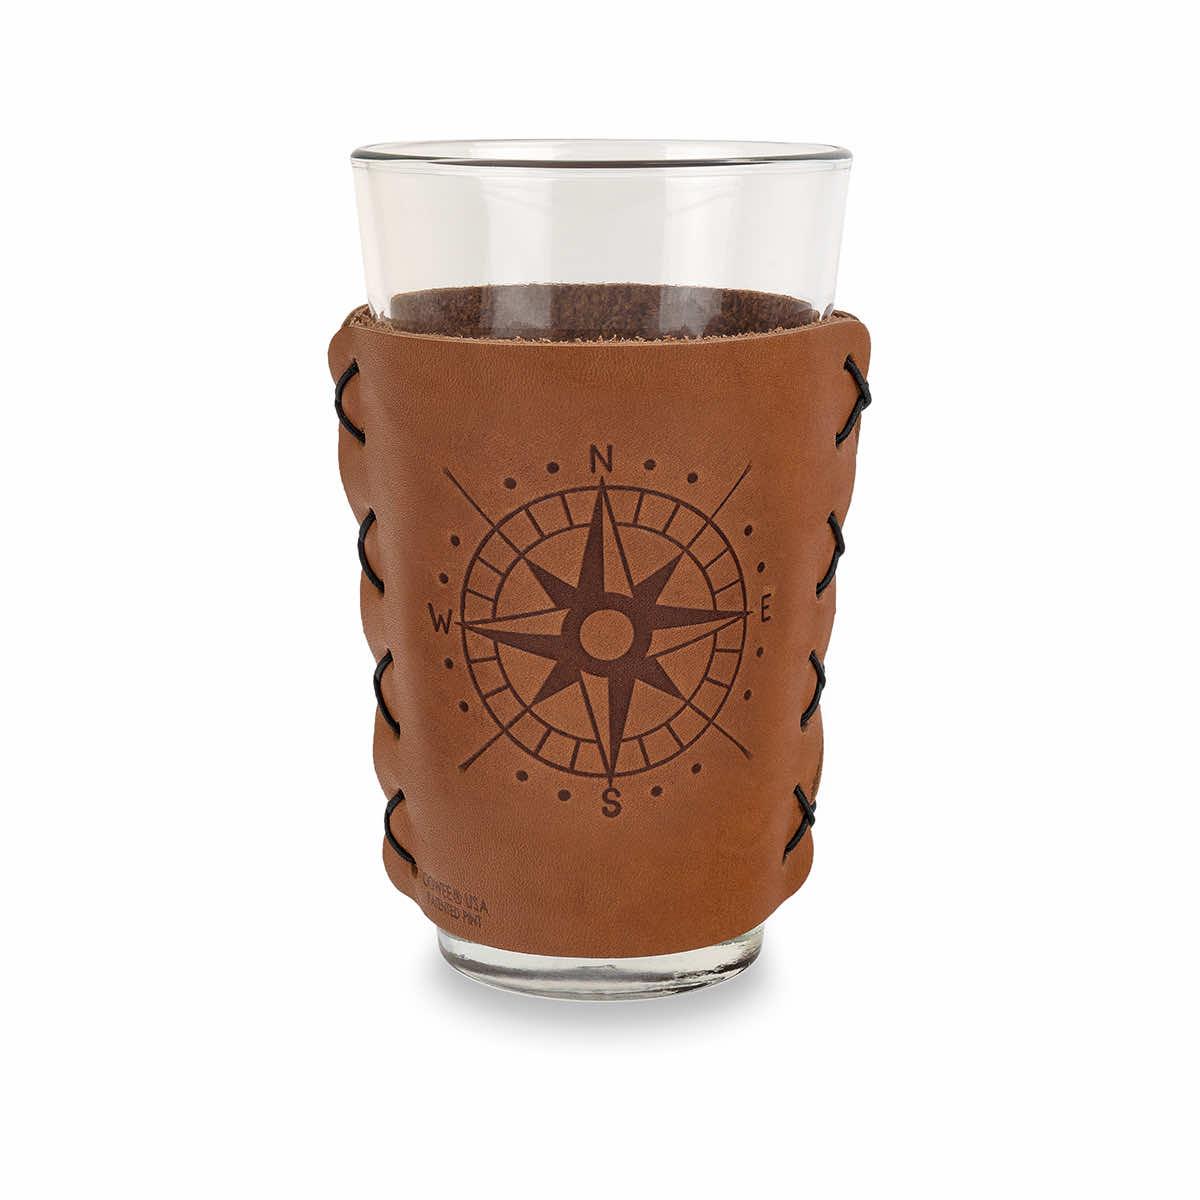 Leather Head 16 oz Pint Glasses (Set of 4) – Leather Head Sports